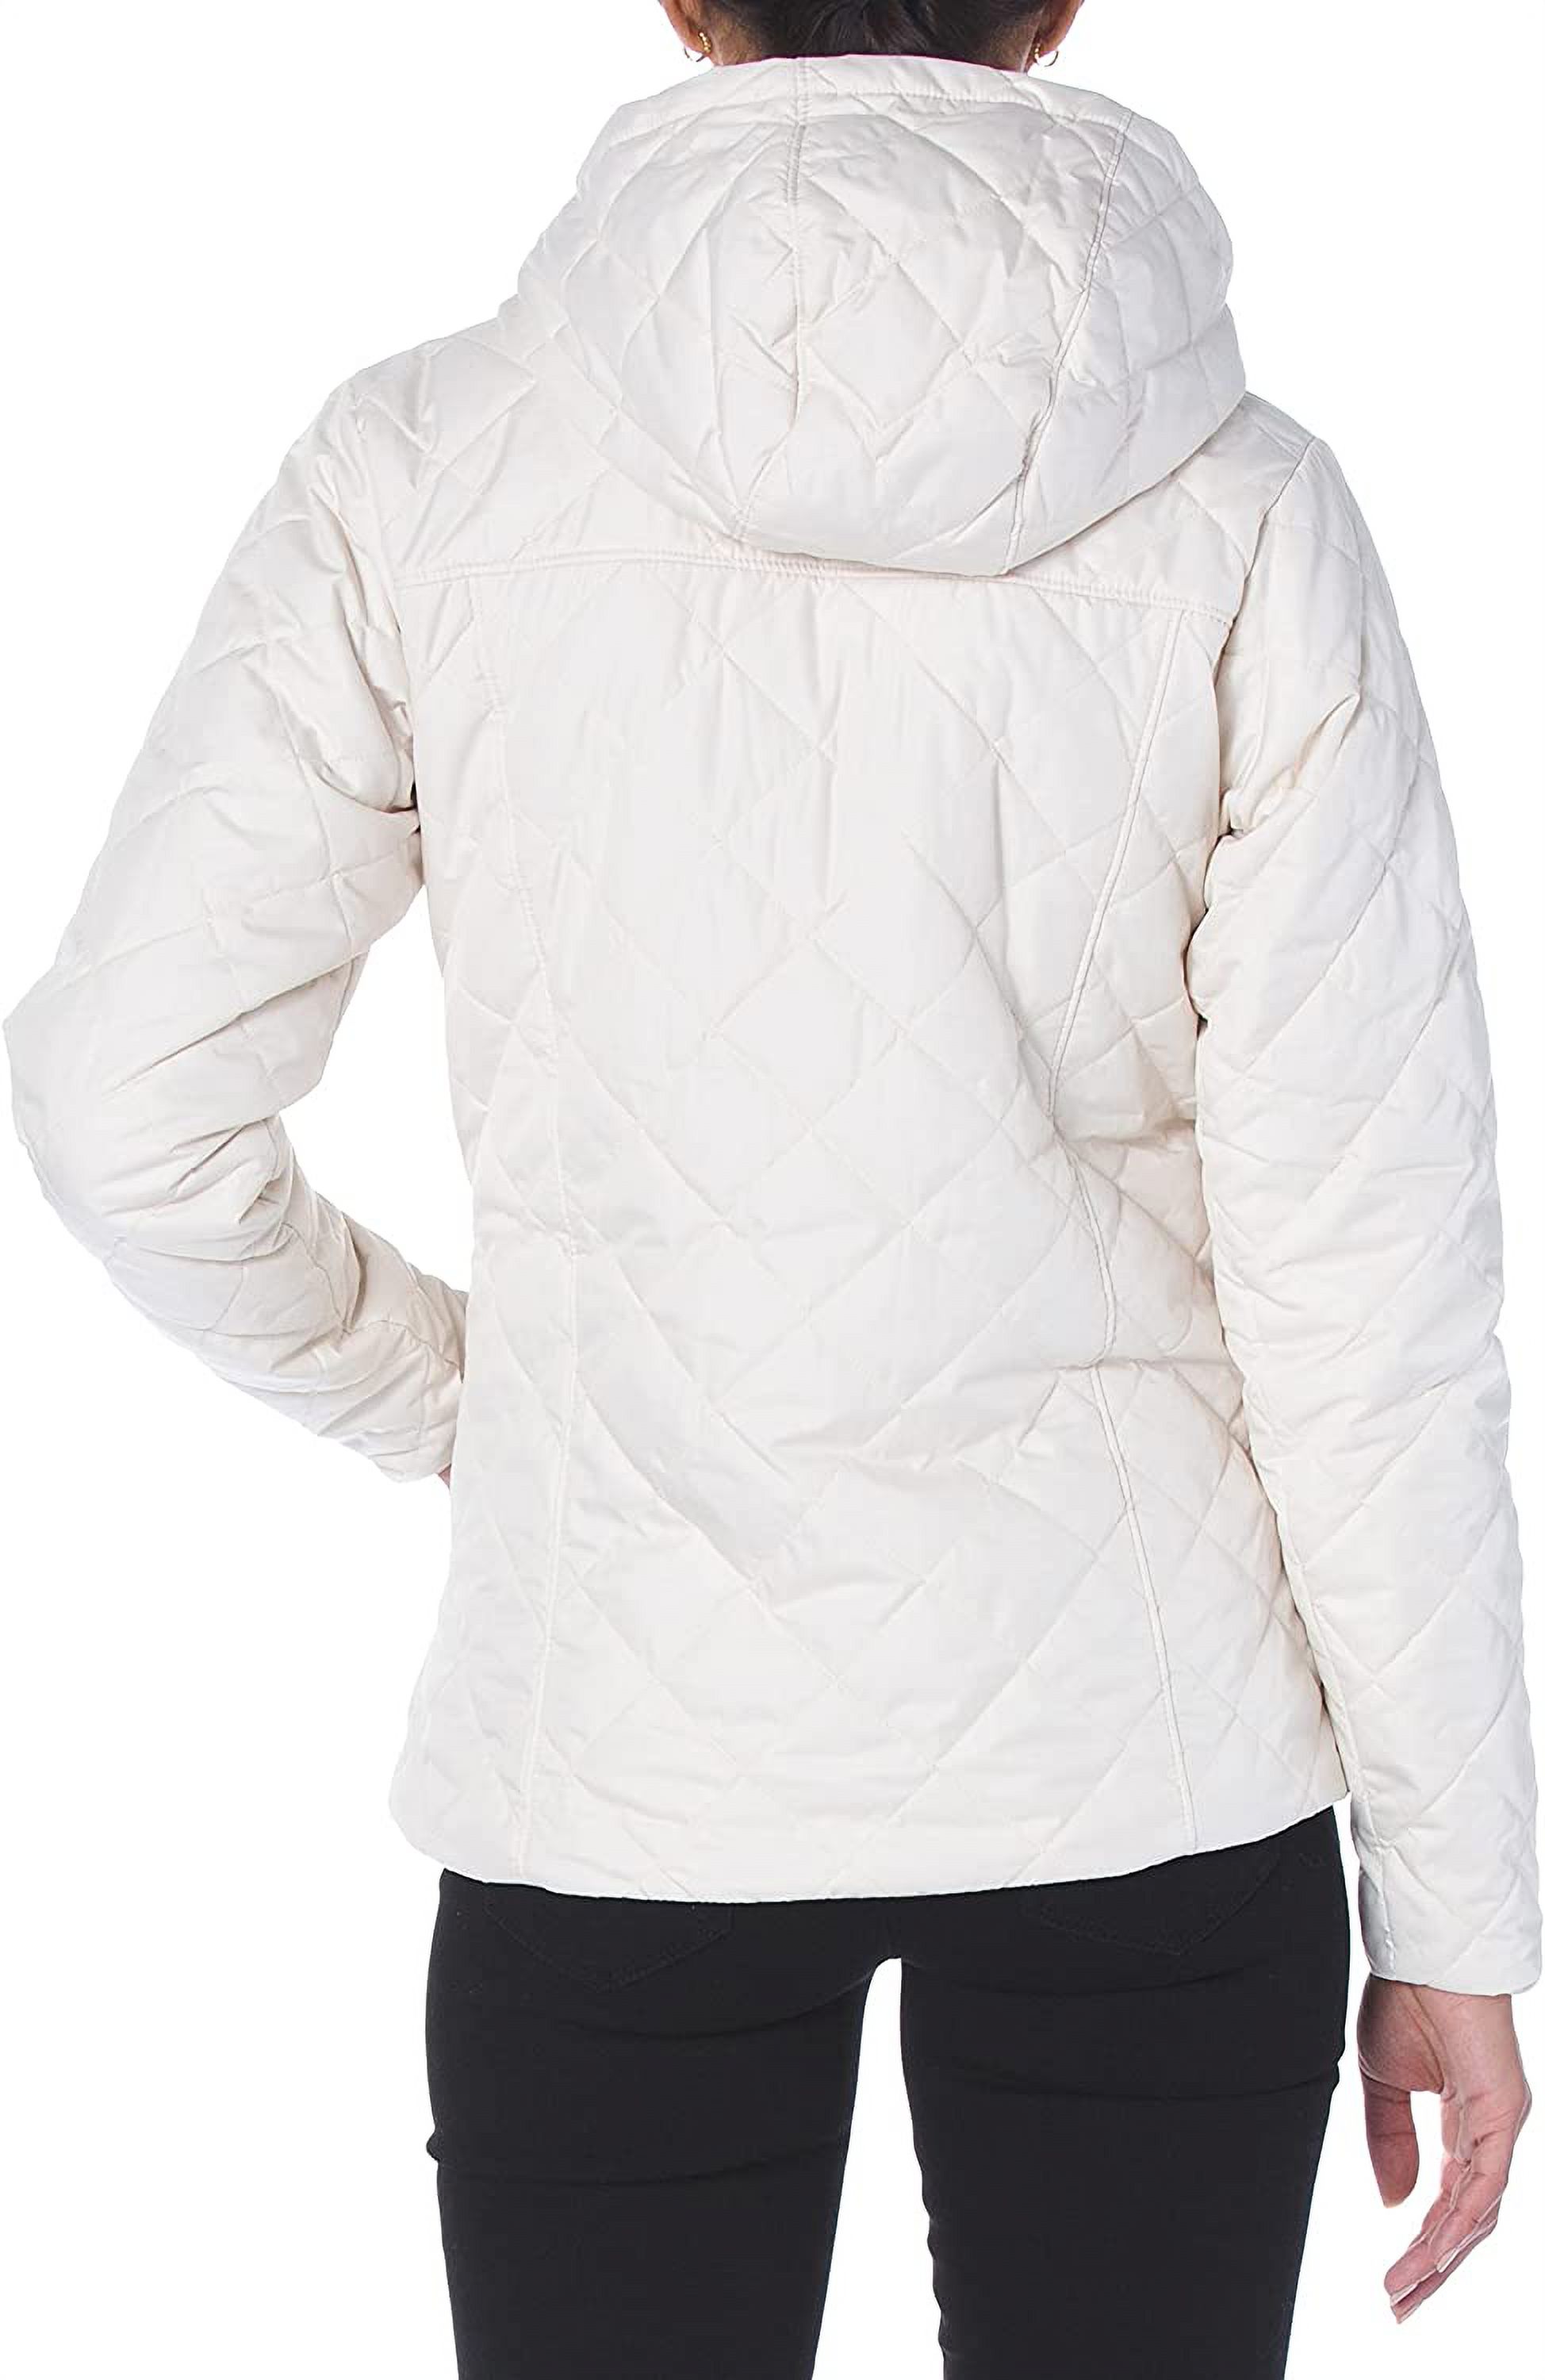 Columbia Women's Copper Crest Hooded Jacket 1761431192 - image 2 of 3